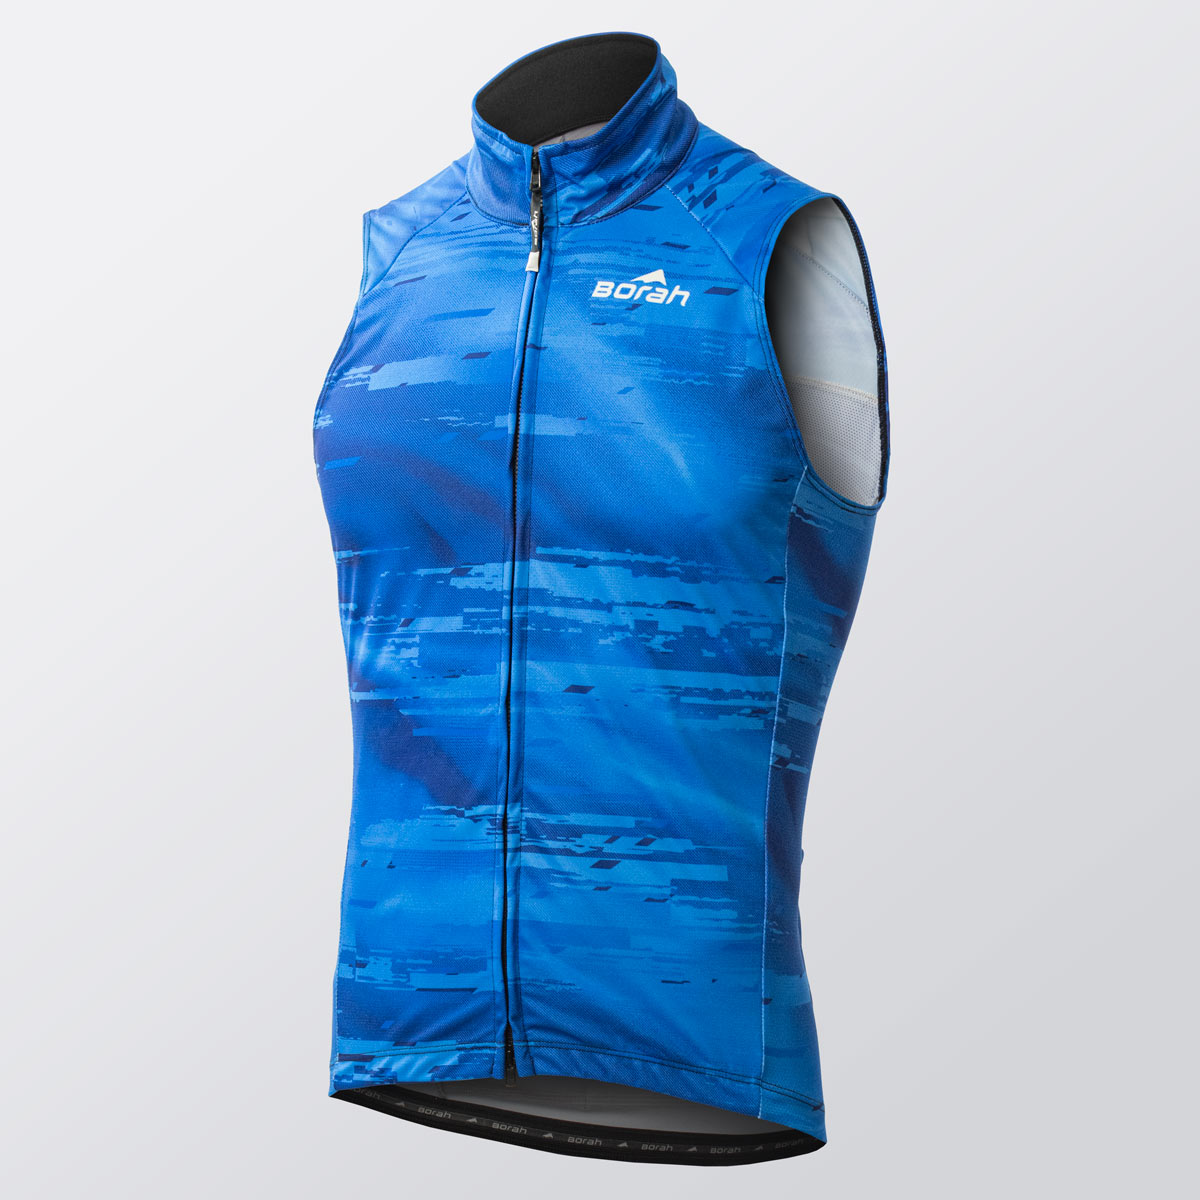 OTW Midweight Cycling Vest front view.